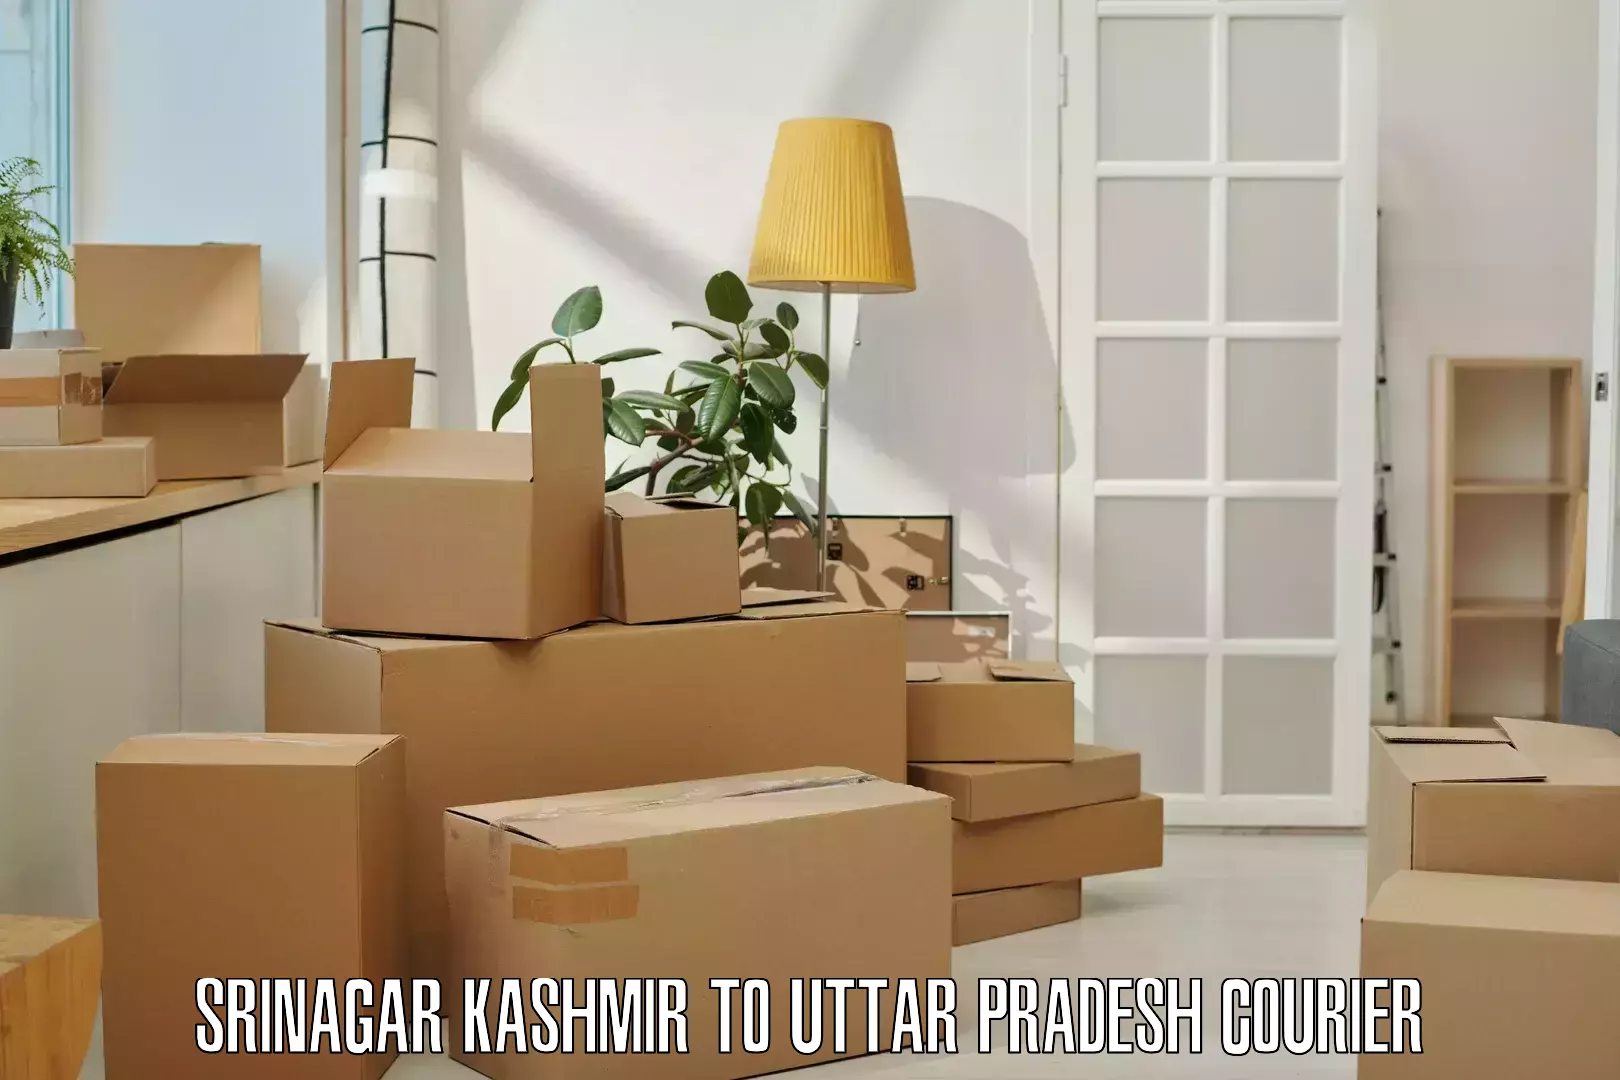 Package delivery network Srinagar Kashmir to Sikandra Rao